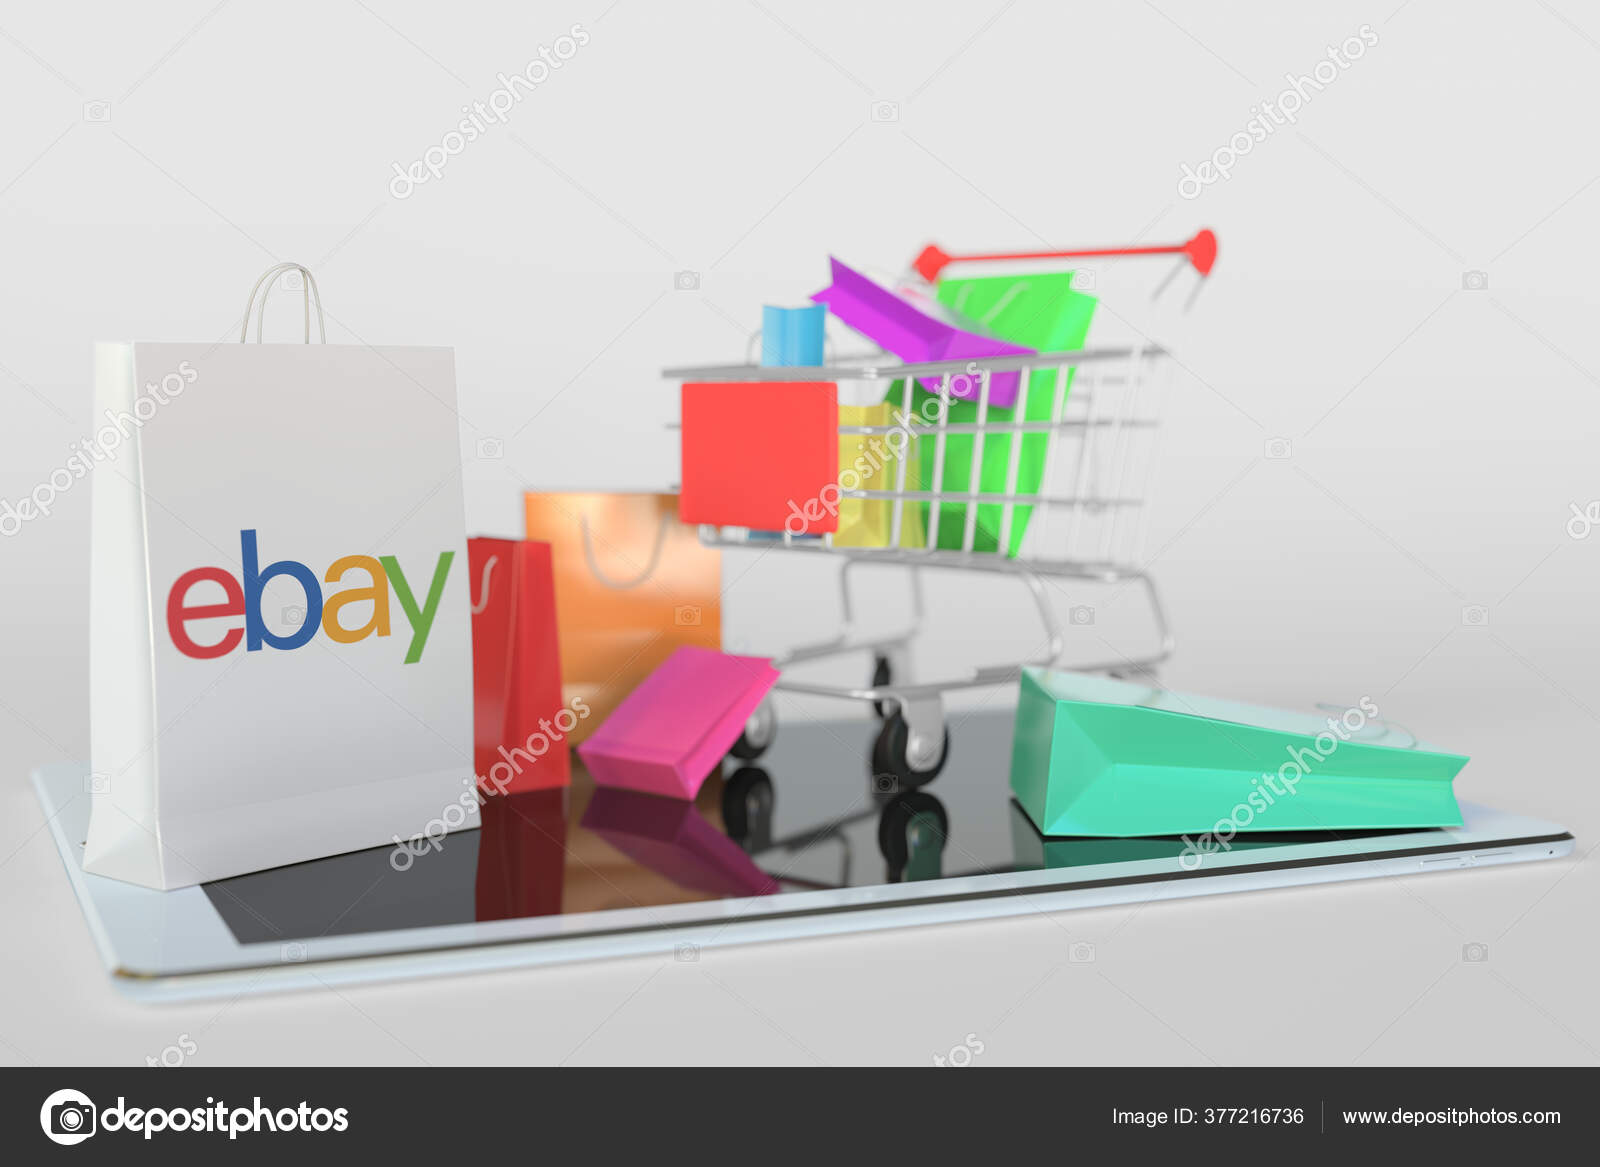 Shopping cart on a tablet computer and paper bag with  logo